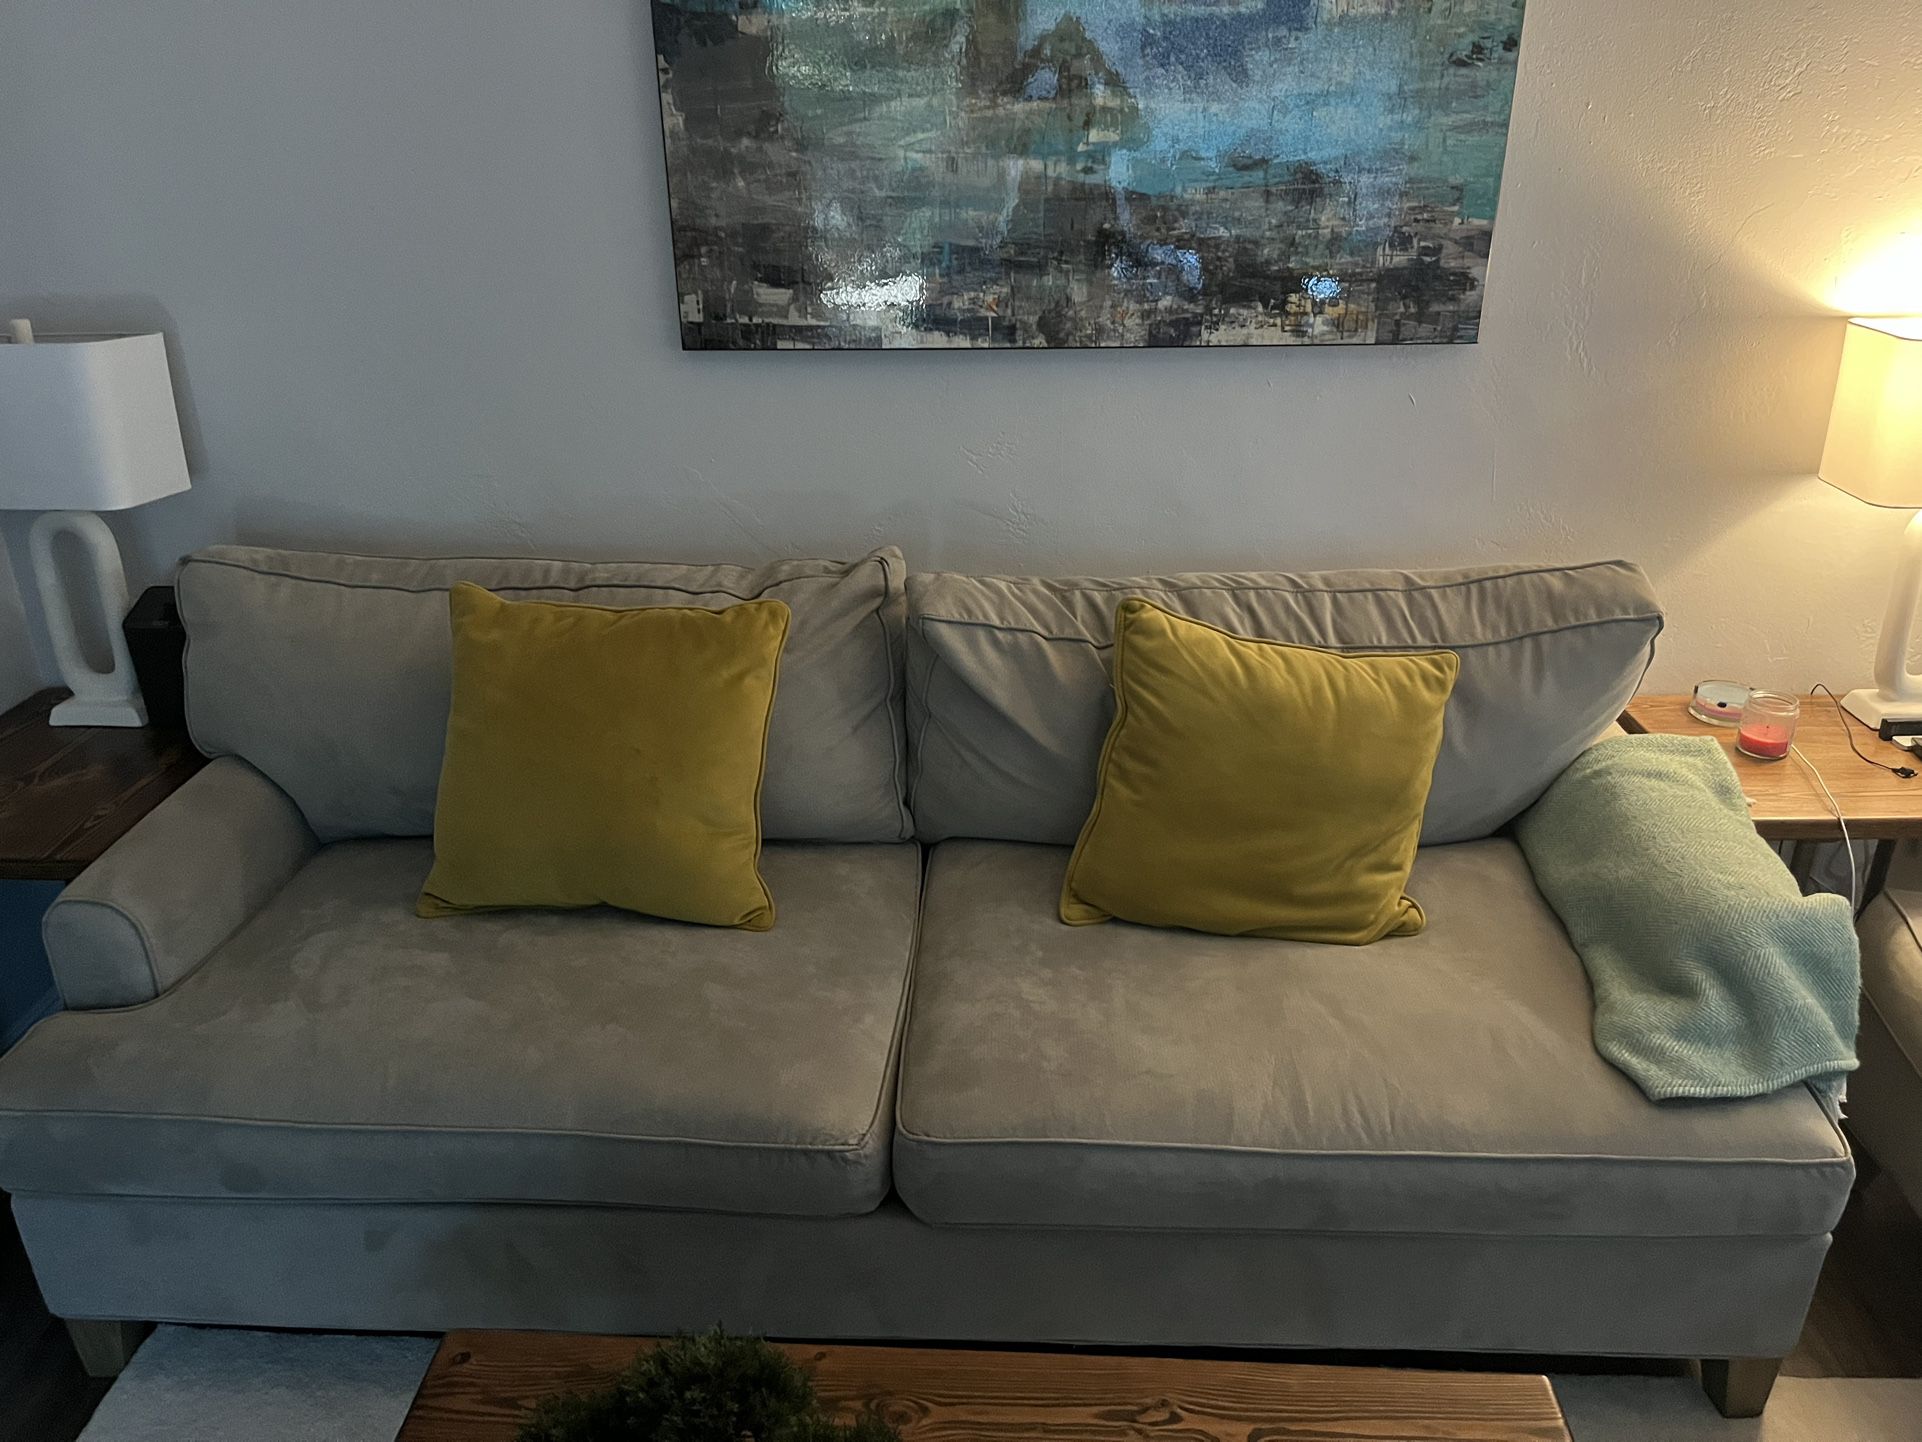 Couch and love seat